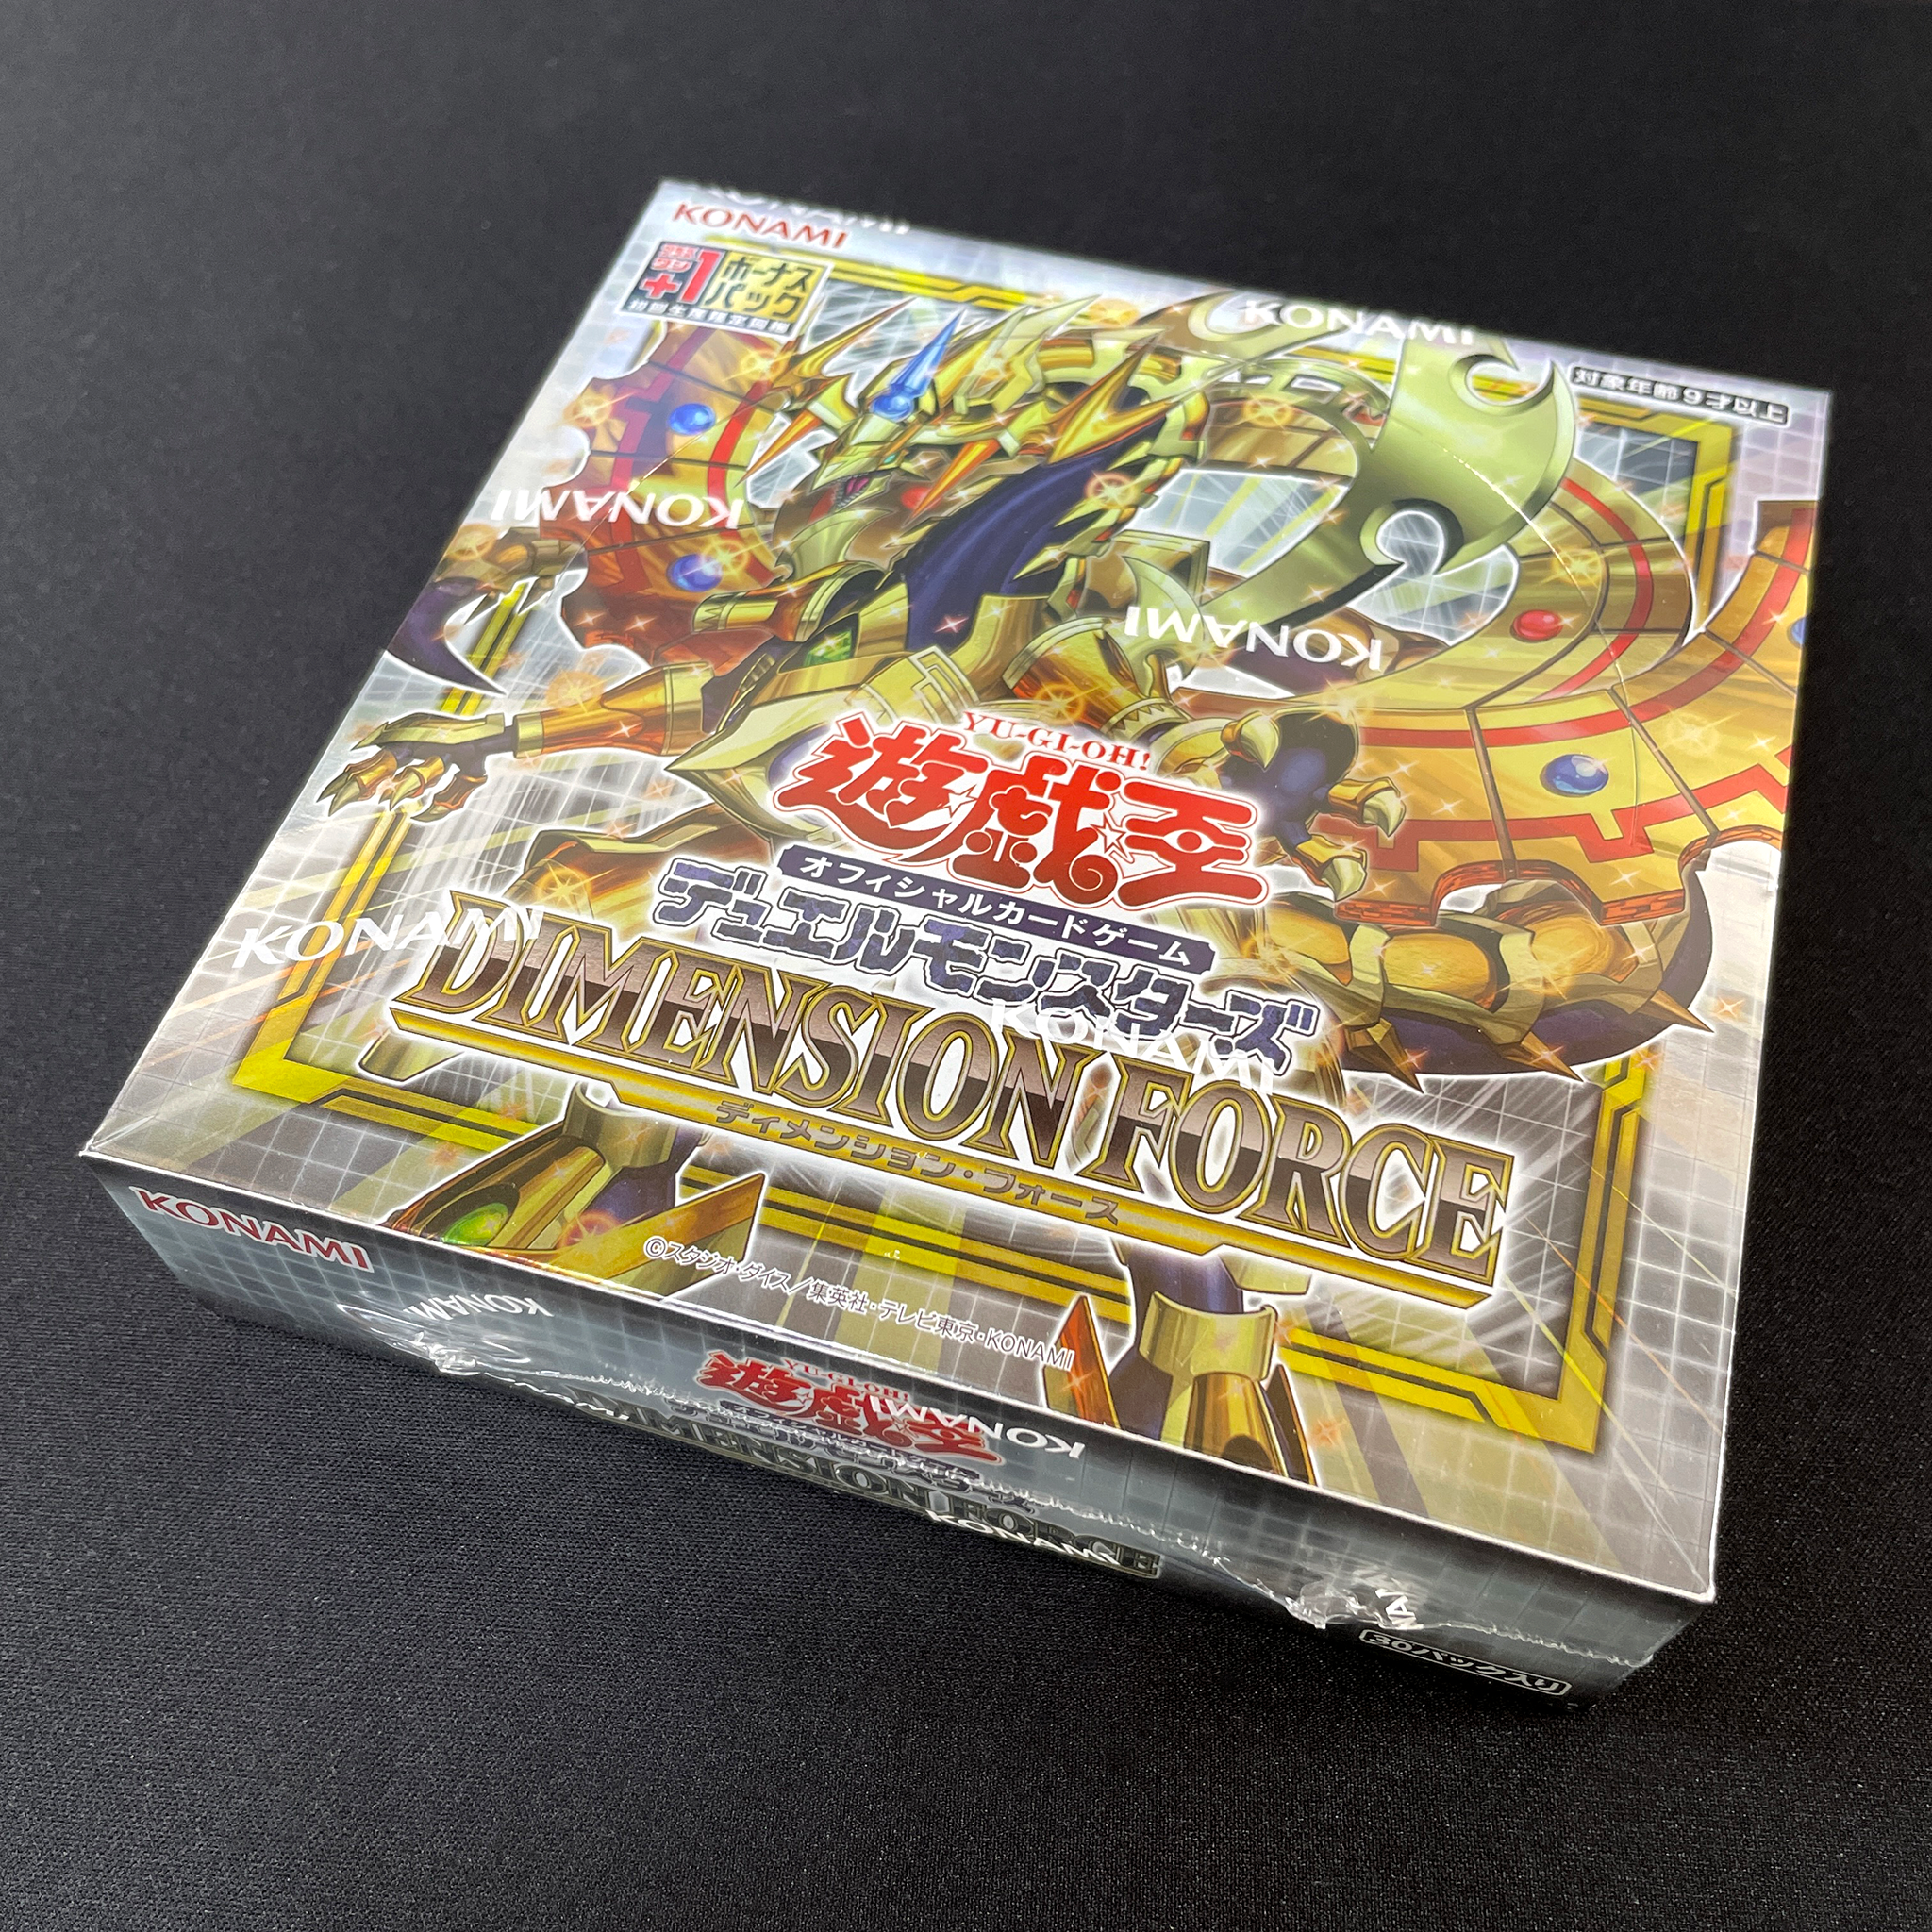 Yu-Gi-Oh! Official Card Game Duel Monsters ｢DIMENSION FORCE｣ Box